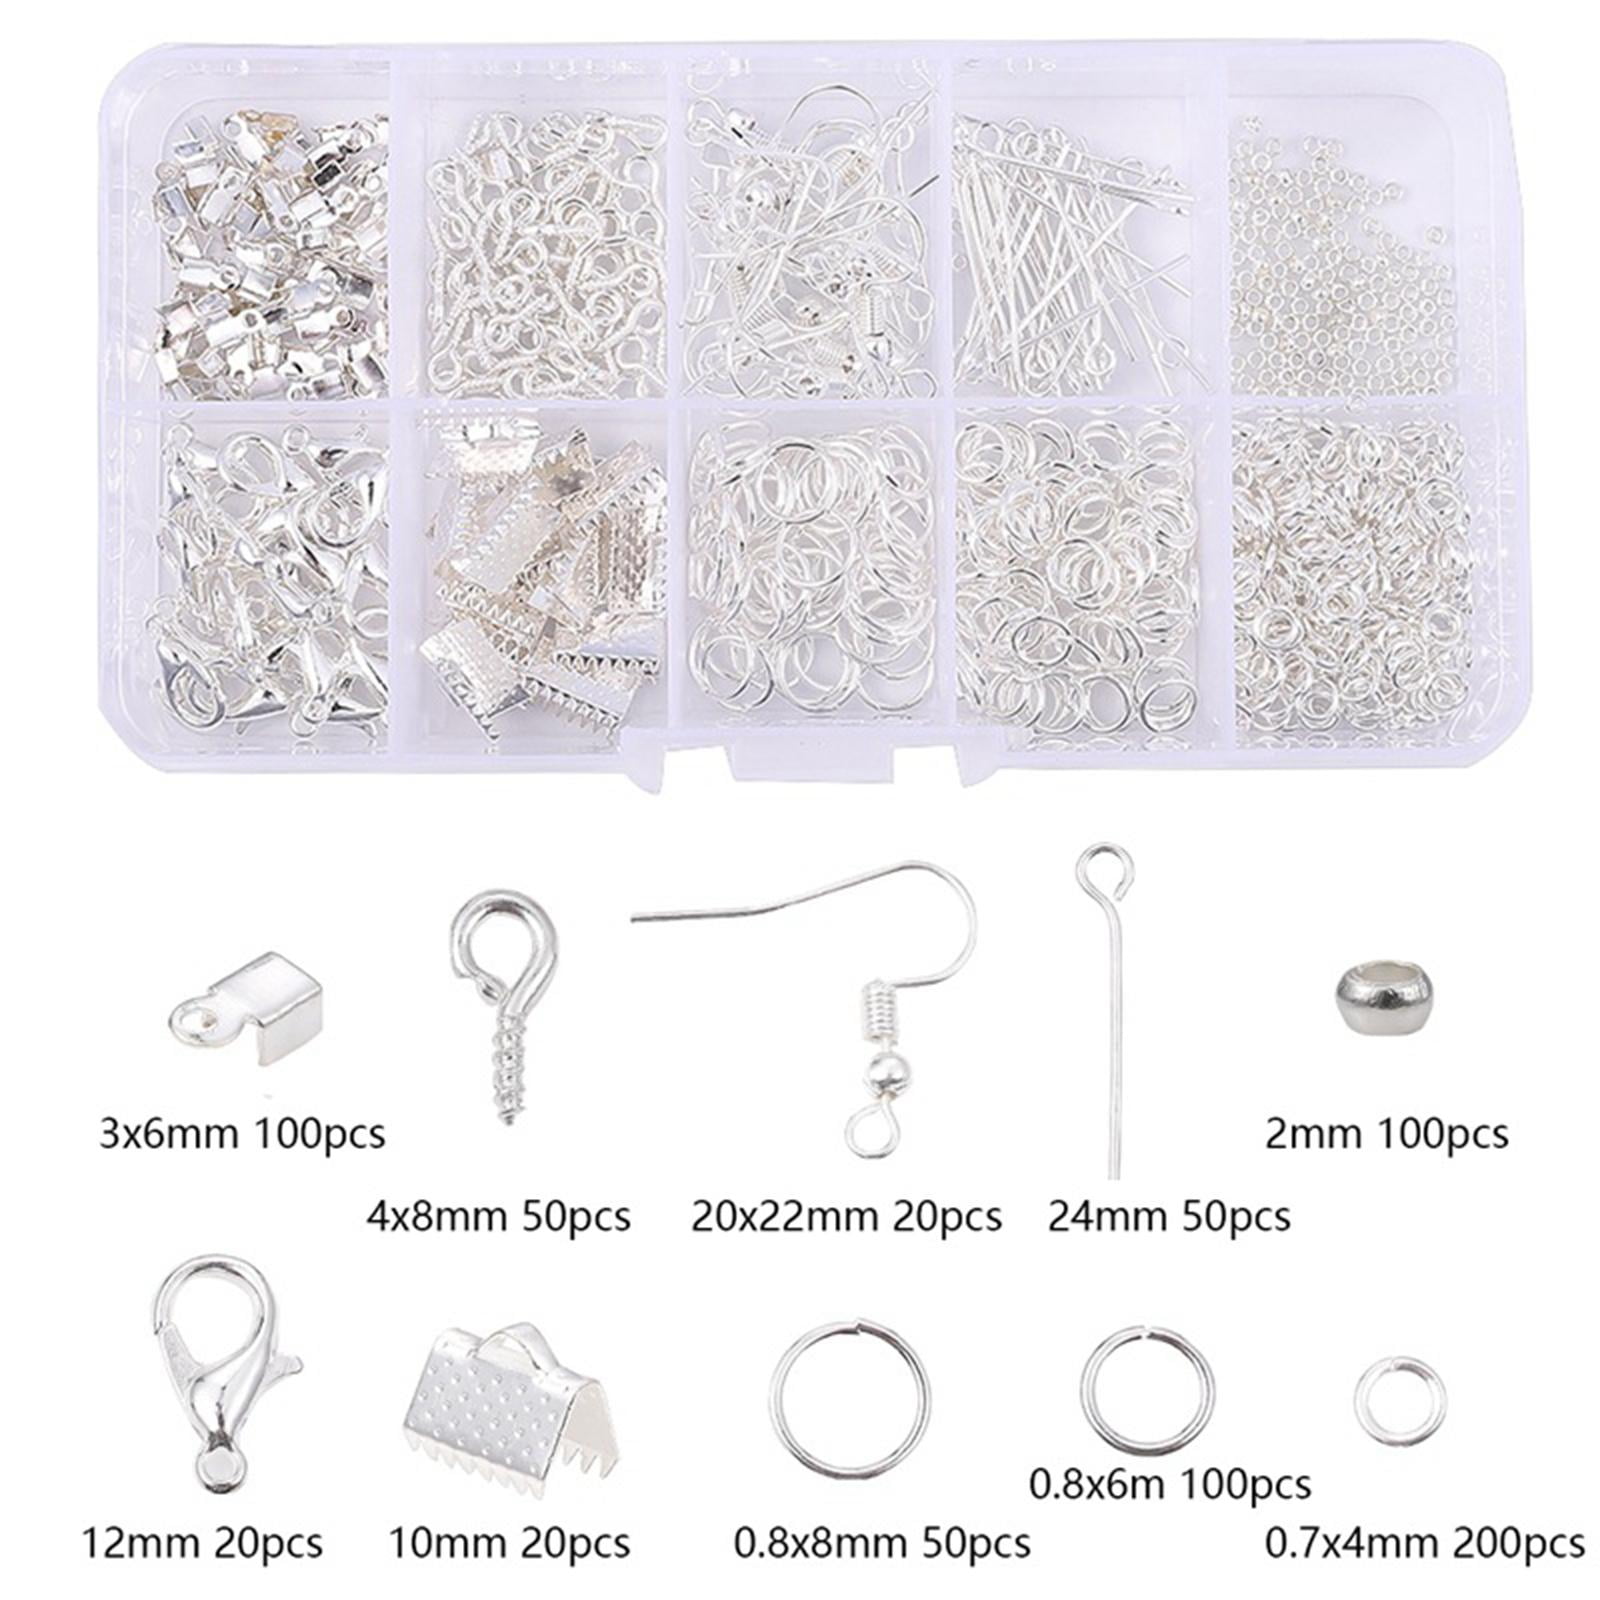 Earring Making Supplies Kit, Southwit 2900pcs Earring Hardware Pieces  Repair Parts with Earring Hooks Posts Backs and Jump Rings for Making  Earrings Studs and Jewelry Making (Silver & Gold) 